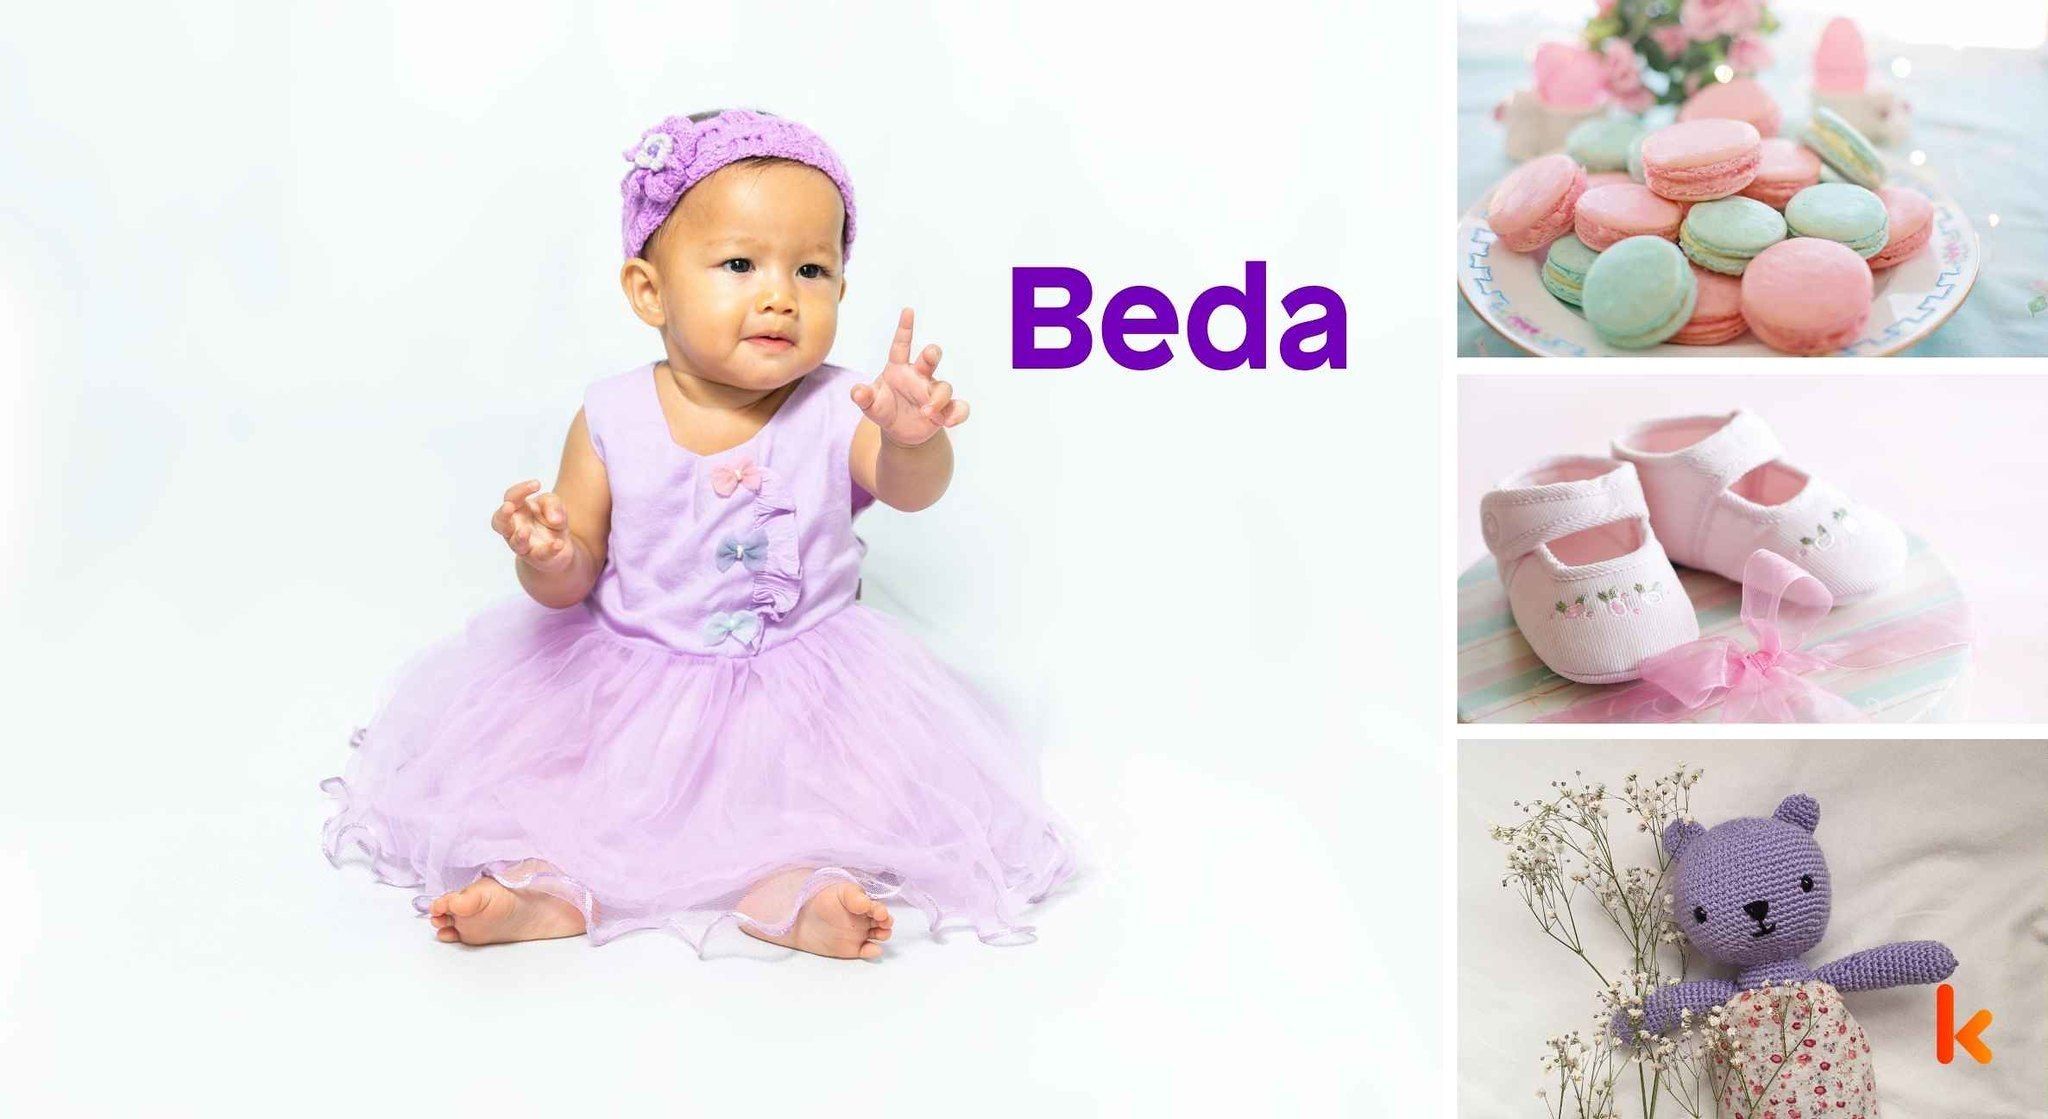 Meaning of the name Beda